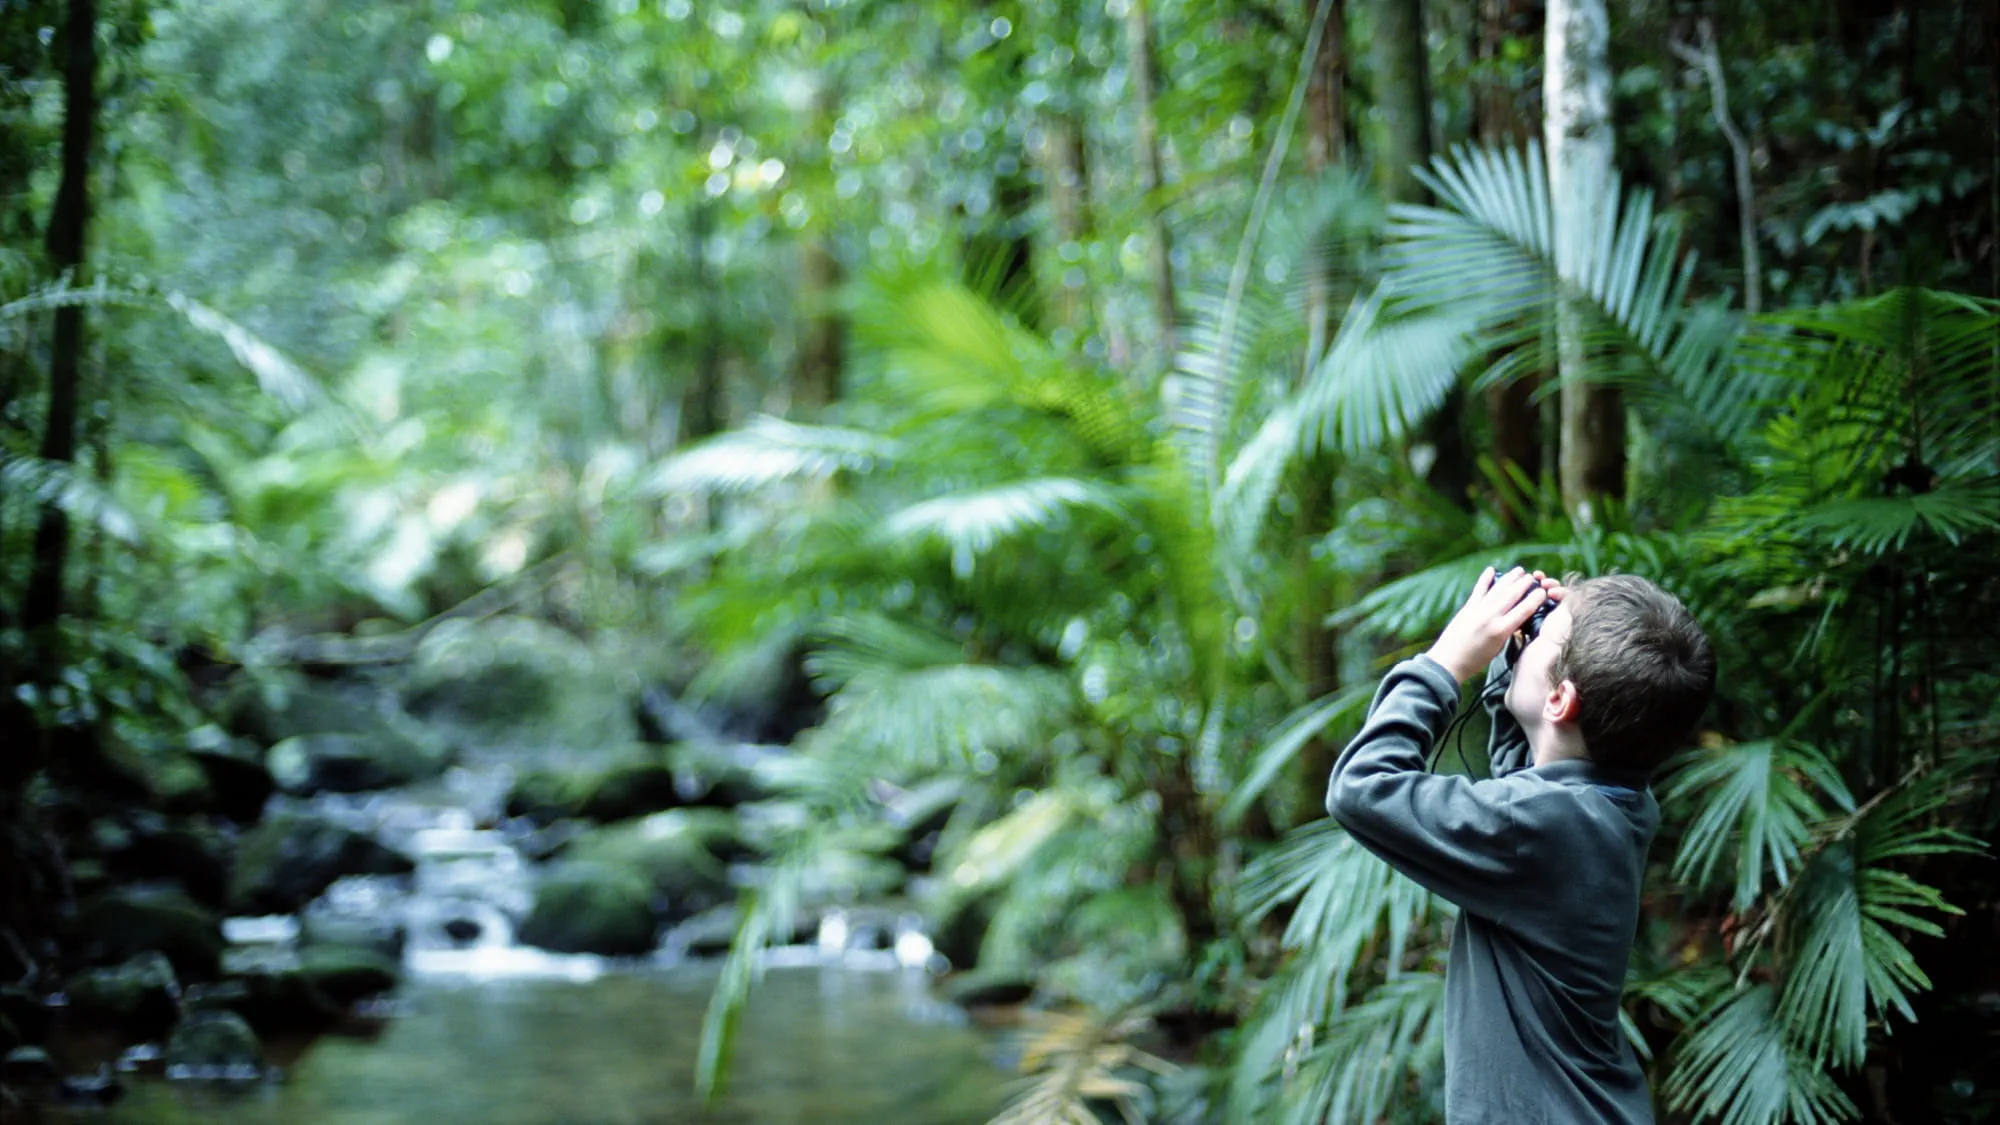 A boy stands in the rainforest and looks up at the trees through binoculars